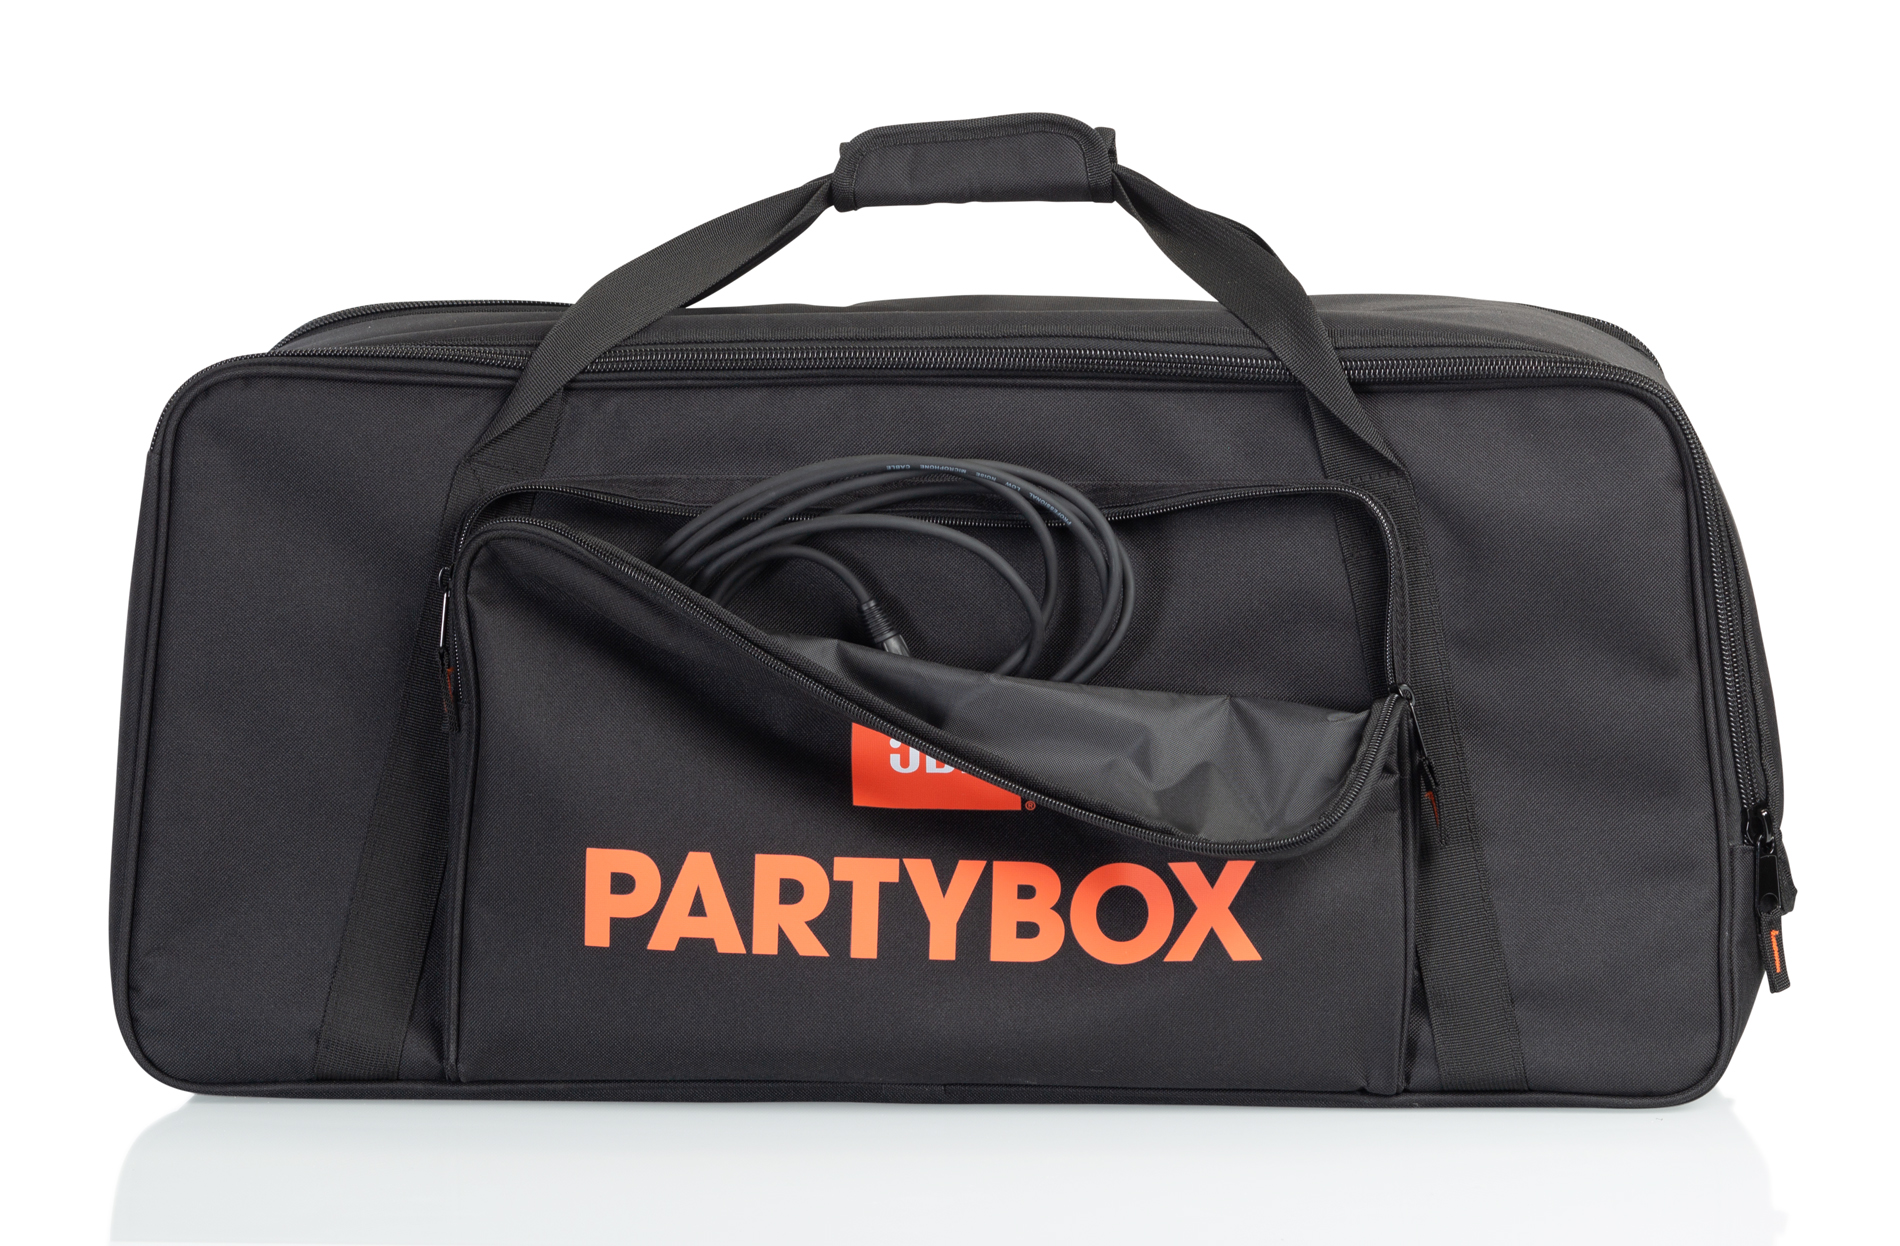 Jbl Partybox 310 Accessories, Jbl Partybox 310 Carry Bag